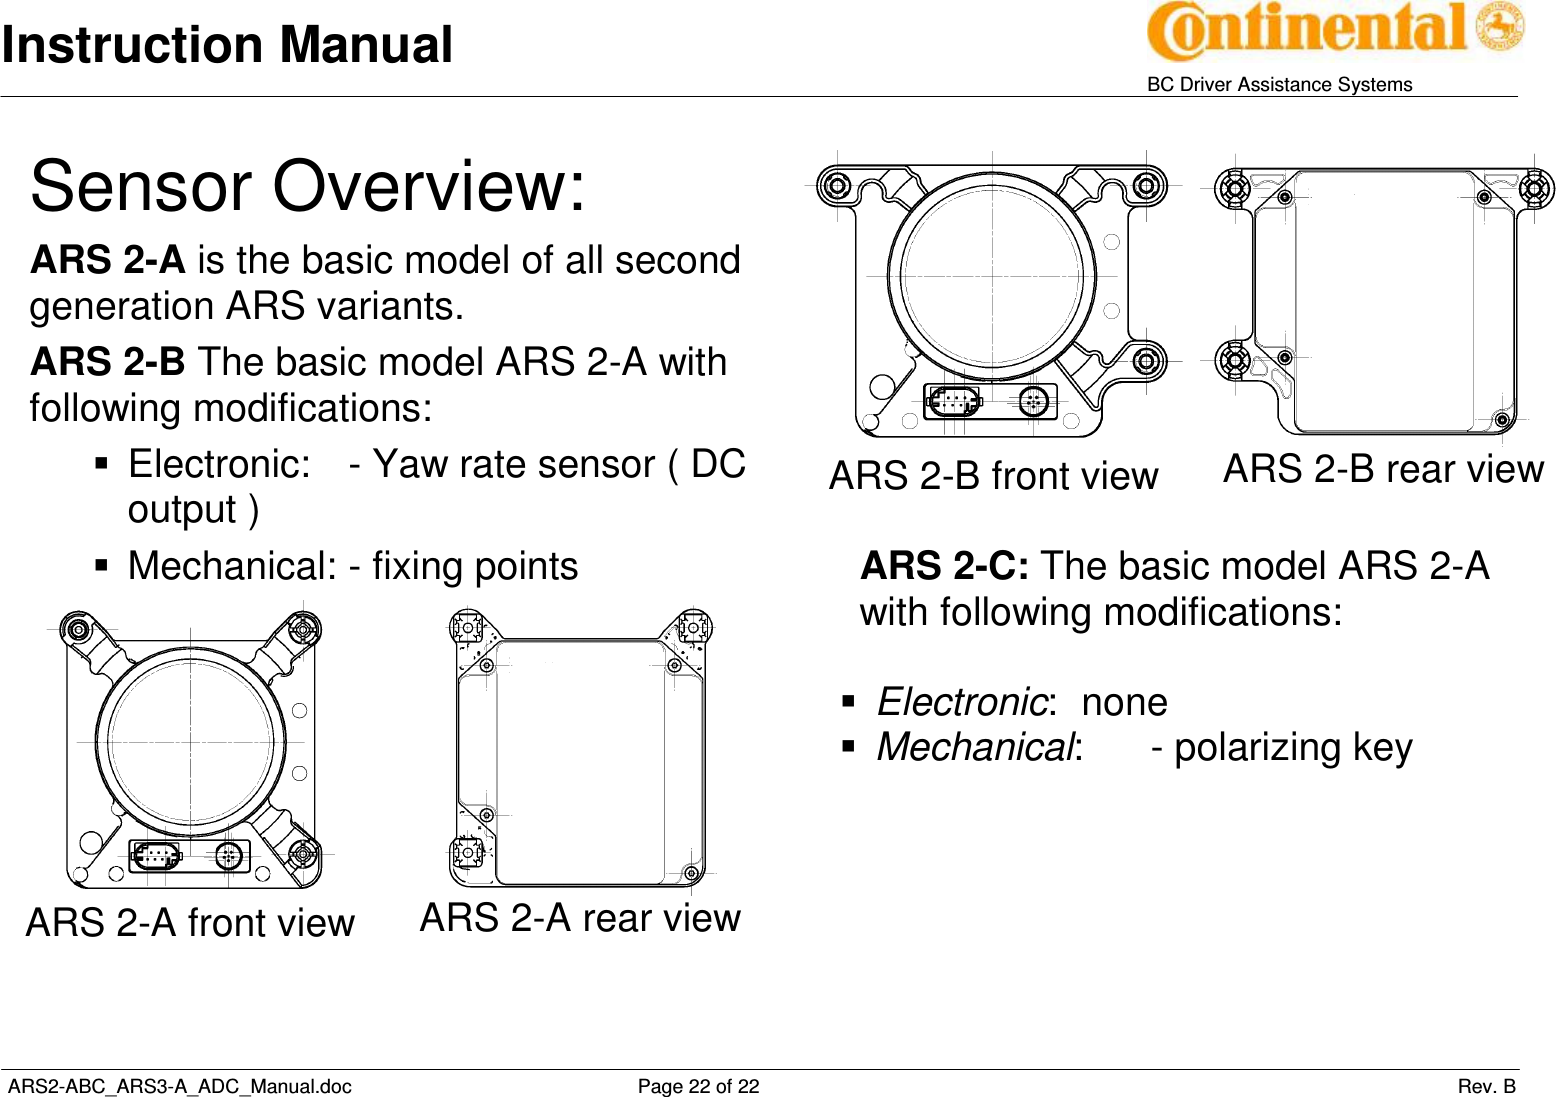 Instruction Manual   BC Driver Assistance Systems  ARS2-ABC_ARS3-A_ADC_Manual.doc     Page 22 of 22                 Rev. B Sensor Overview: ARS 2-A is the basic model of all second generation ARS variants. ARS 2-B The basic model ARS 2-A with following modifications:   Electronic:  - Yaw rate sensor ( DC output )   Mechanical: - fixing points   ARS 2-A front view  ARS 2-A rear view              ARS 2-B front view  ARS 2-B rear view  ARS 2-C: The basic model ARS 2-A with following modifications:   Electronic:  none  Mechanical:  - polarizing key   